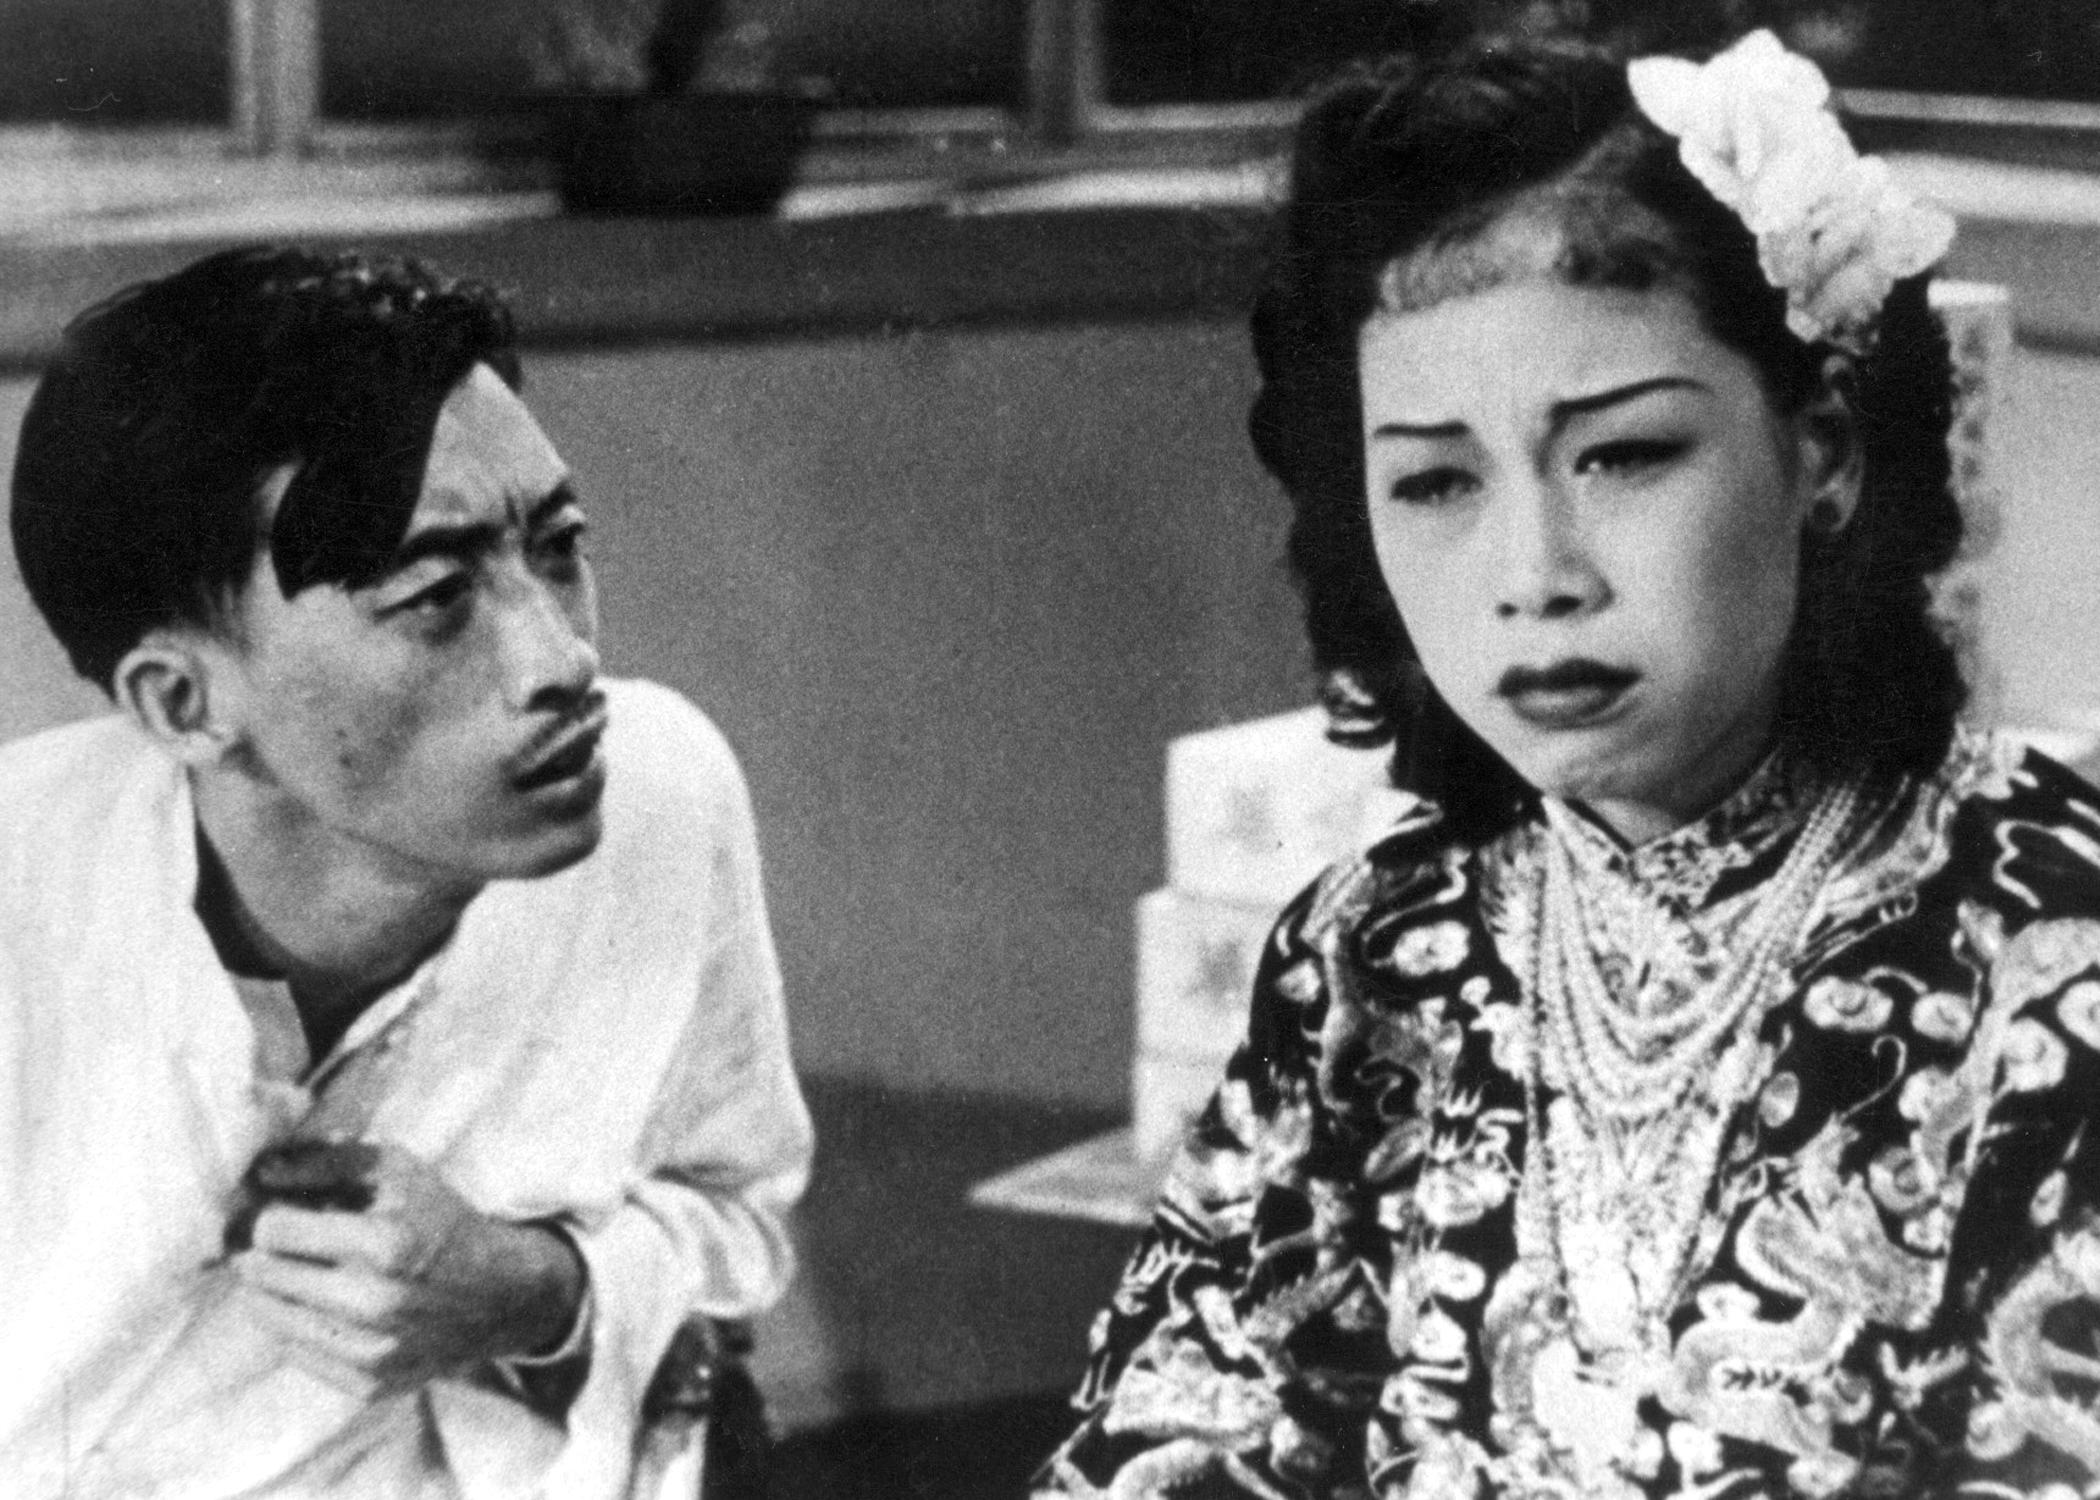 The Hong Kong Film Archive of the Leisure and Cultural Services Department will feature Fong Yim-fan as part of the "Morning Matinee" series from July to December. Eighteen of her movies will be screened at 11am on every Friday, enabling film lovers to revisit the superb acting skills of the Queen of Huadan (female lead). Photo shows a film still of "Mysterious Murder (Part One)" (1951).